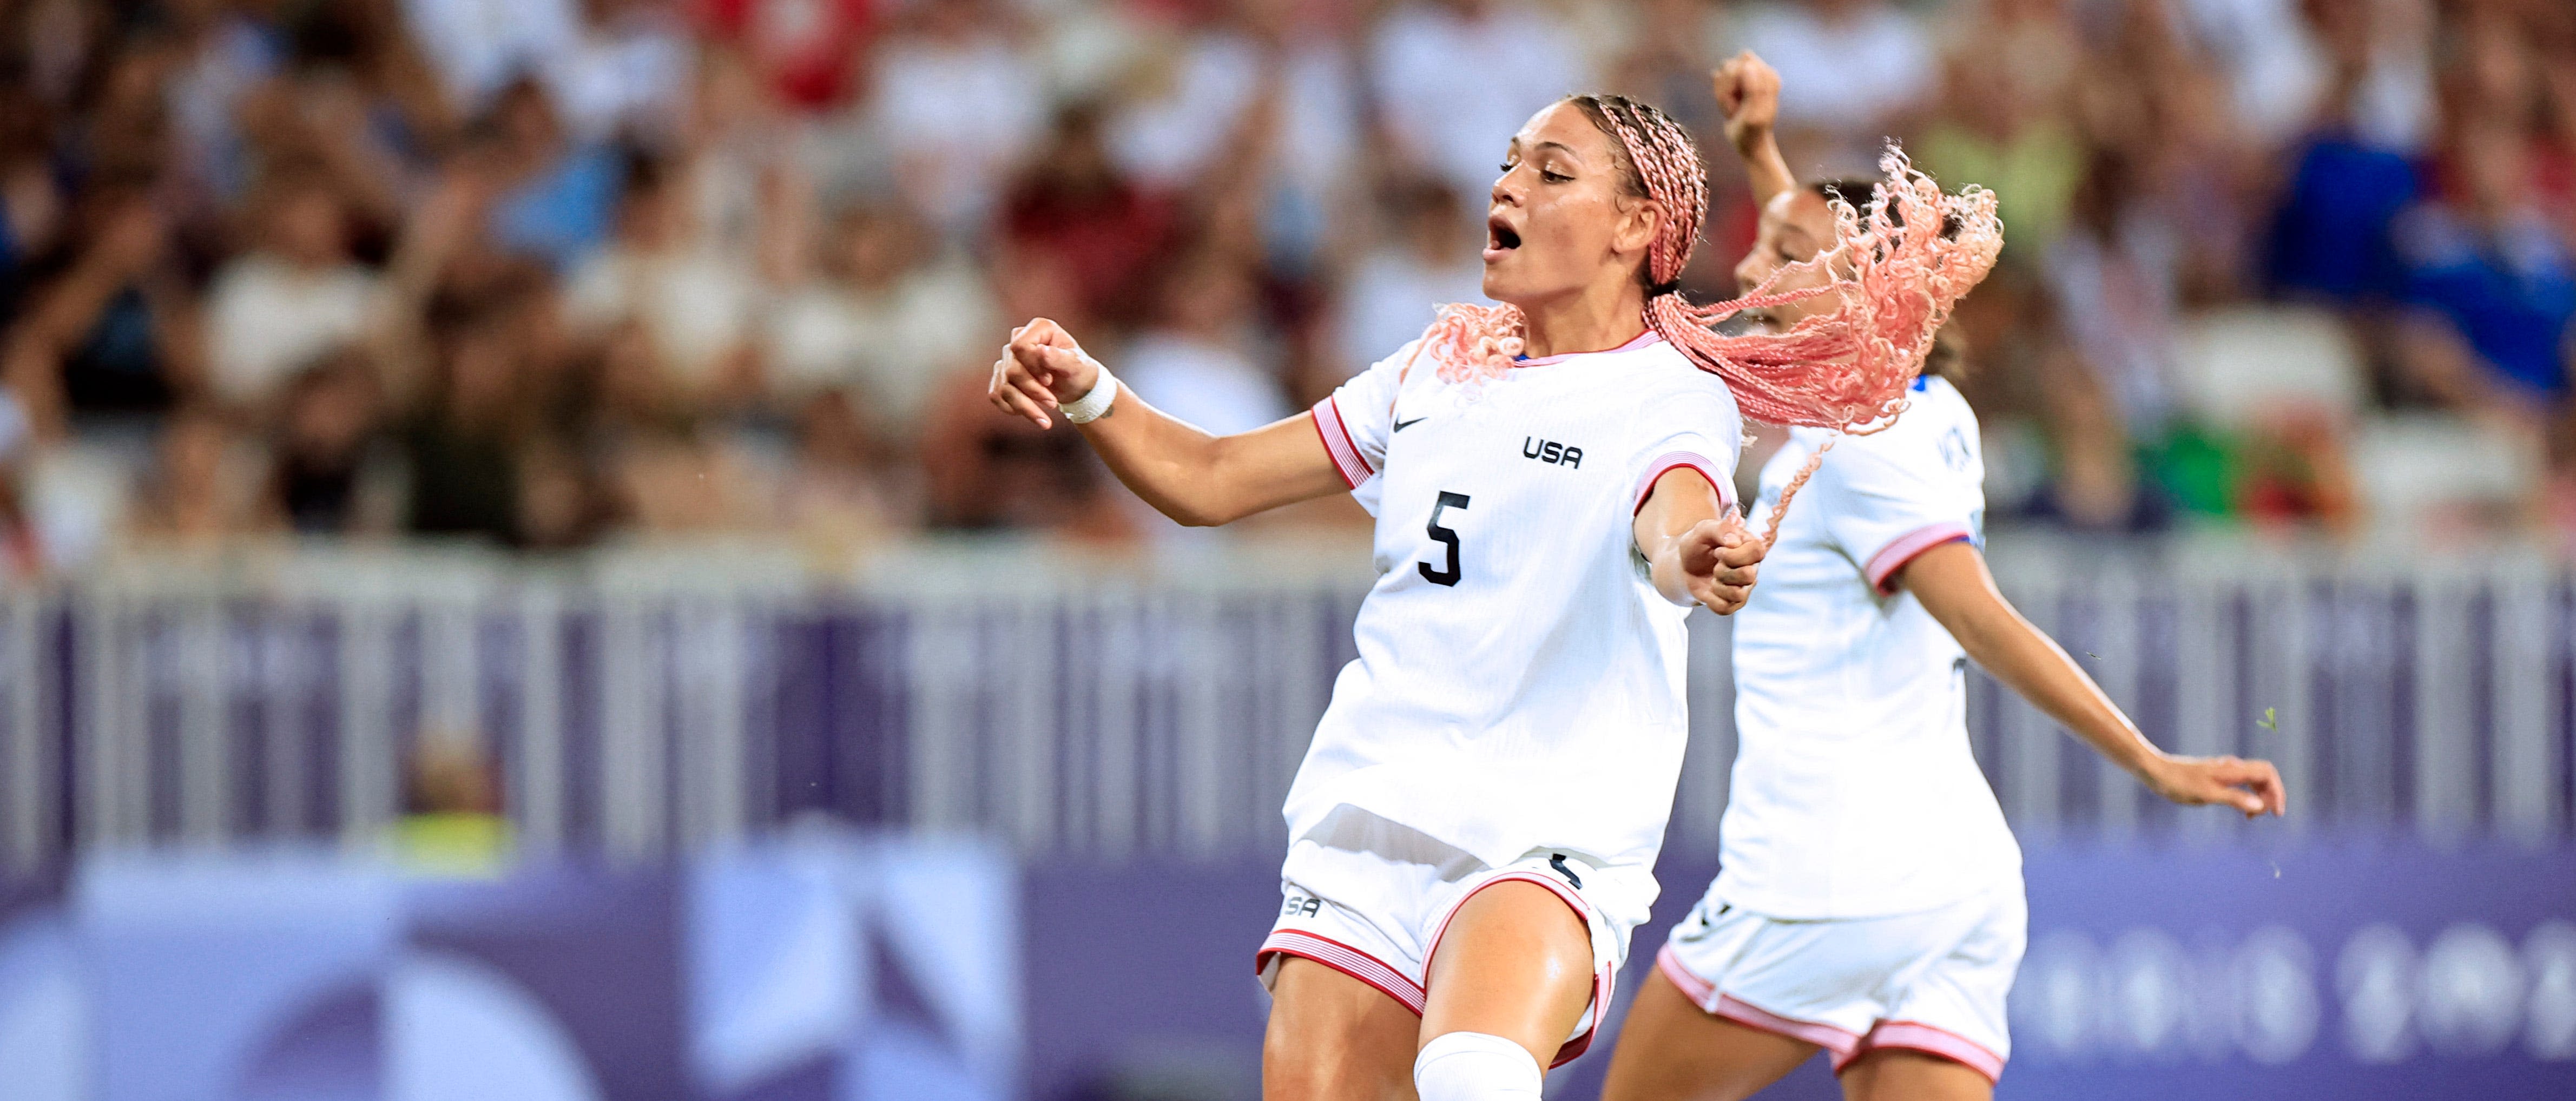 Trinity Rodman had fans in awe with her stunning goal to open the USWNT's scoring at the Paris Olympics